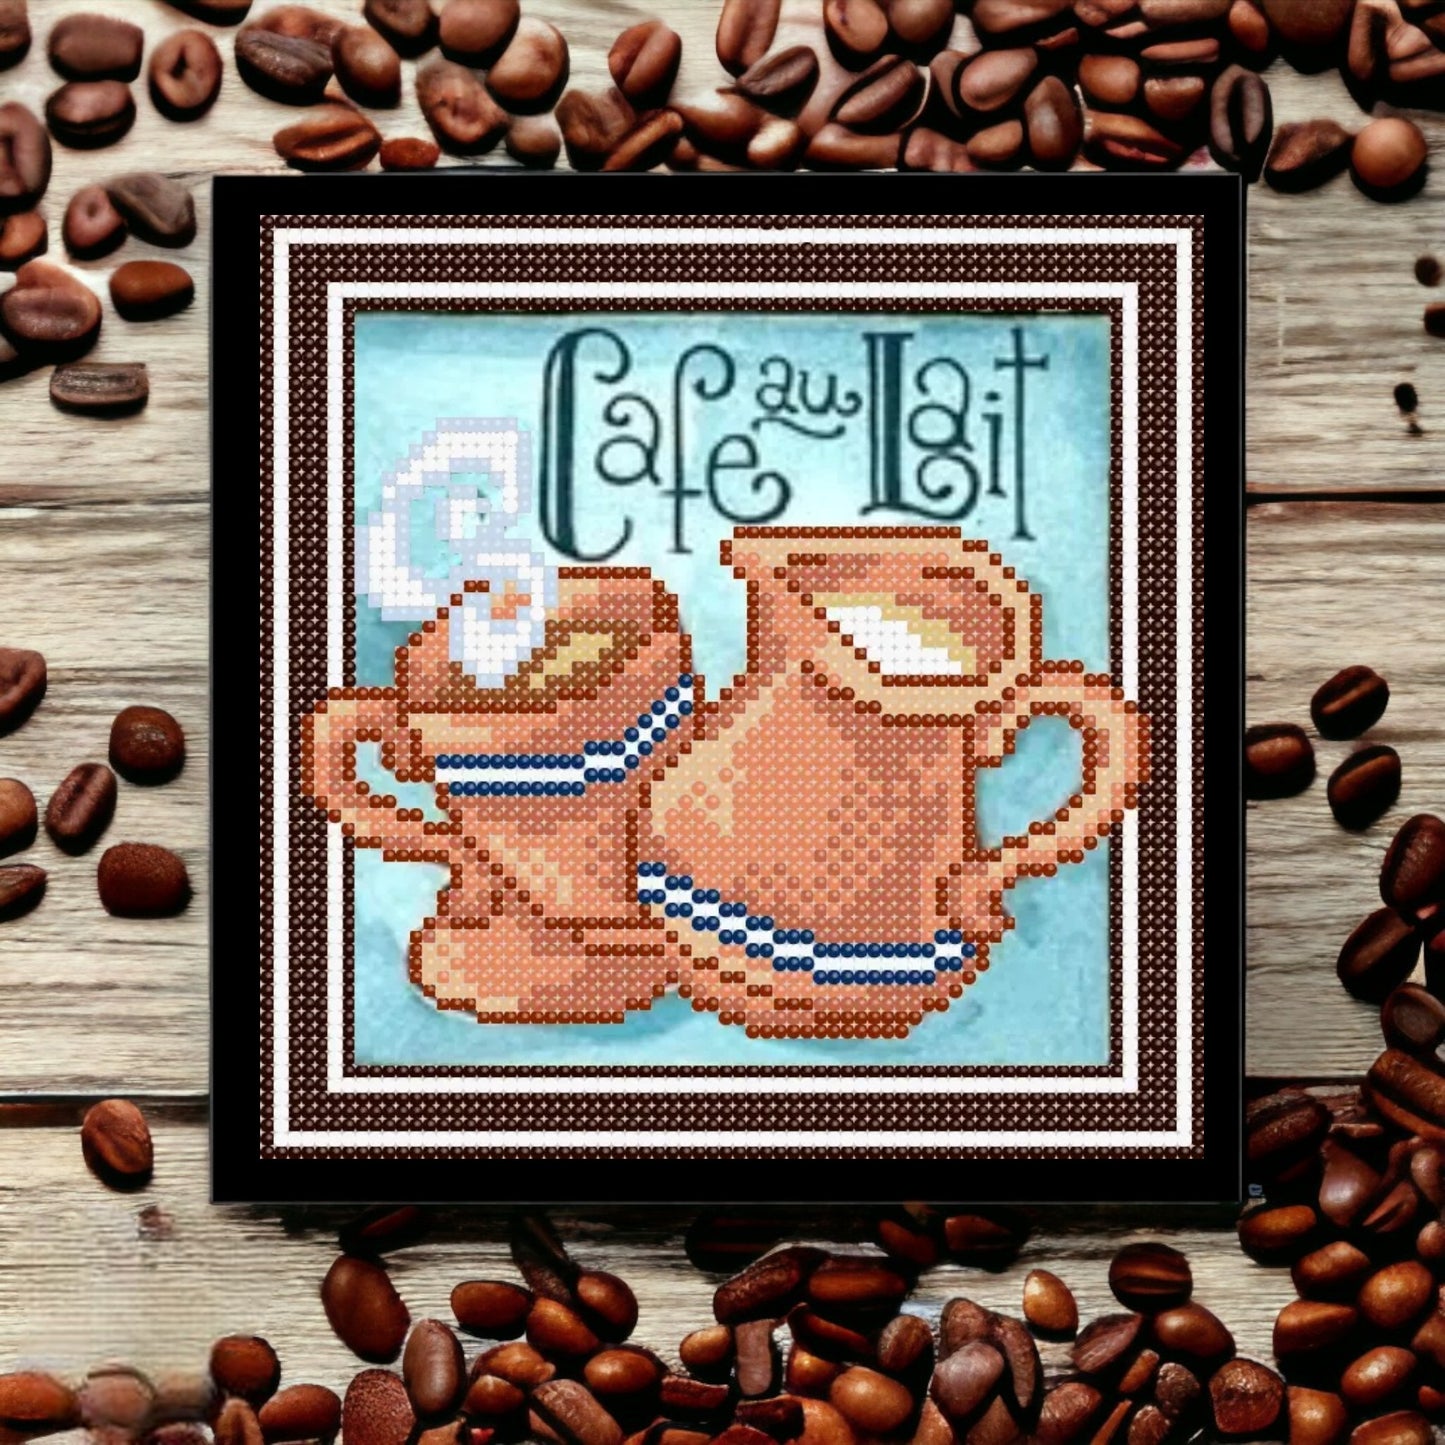 DIY Bead embroidery kit "Coffee with cream". Size: 6.3 - 6.3in (16 - 16cm). - VadymShop